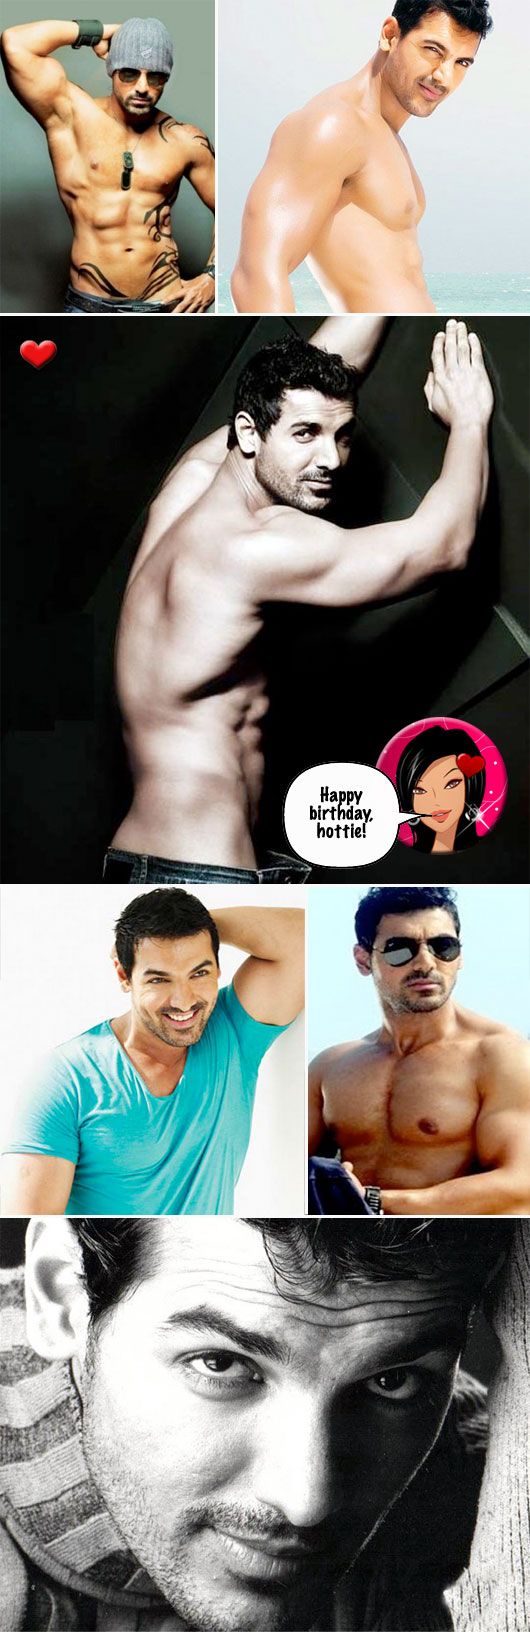 Dec 17th: Happy Birthday, John Abraham! (Our Hottie of the Day!)